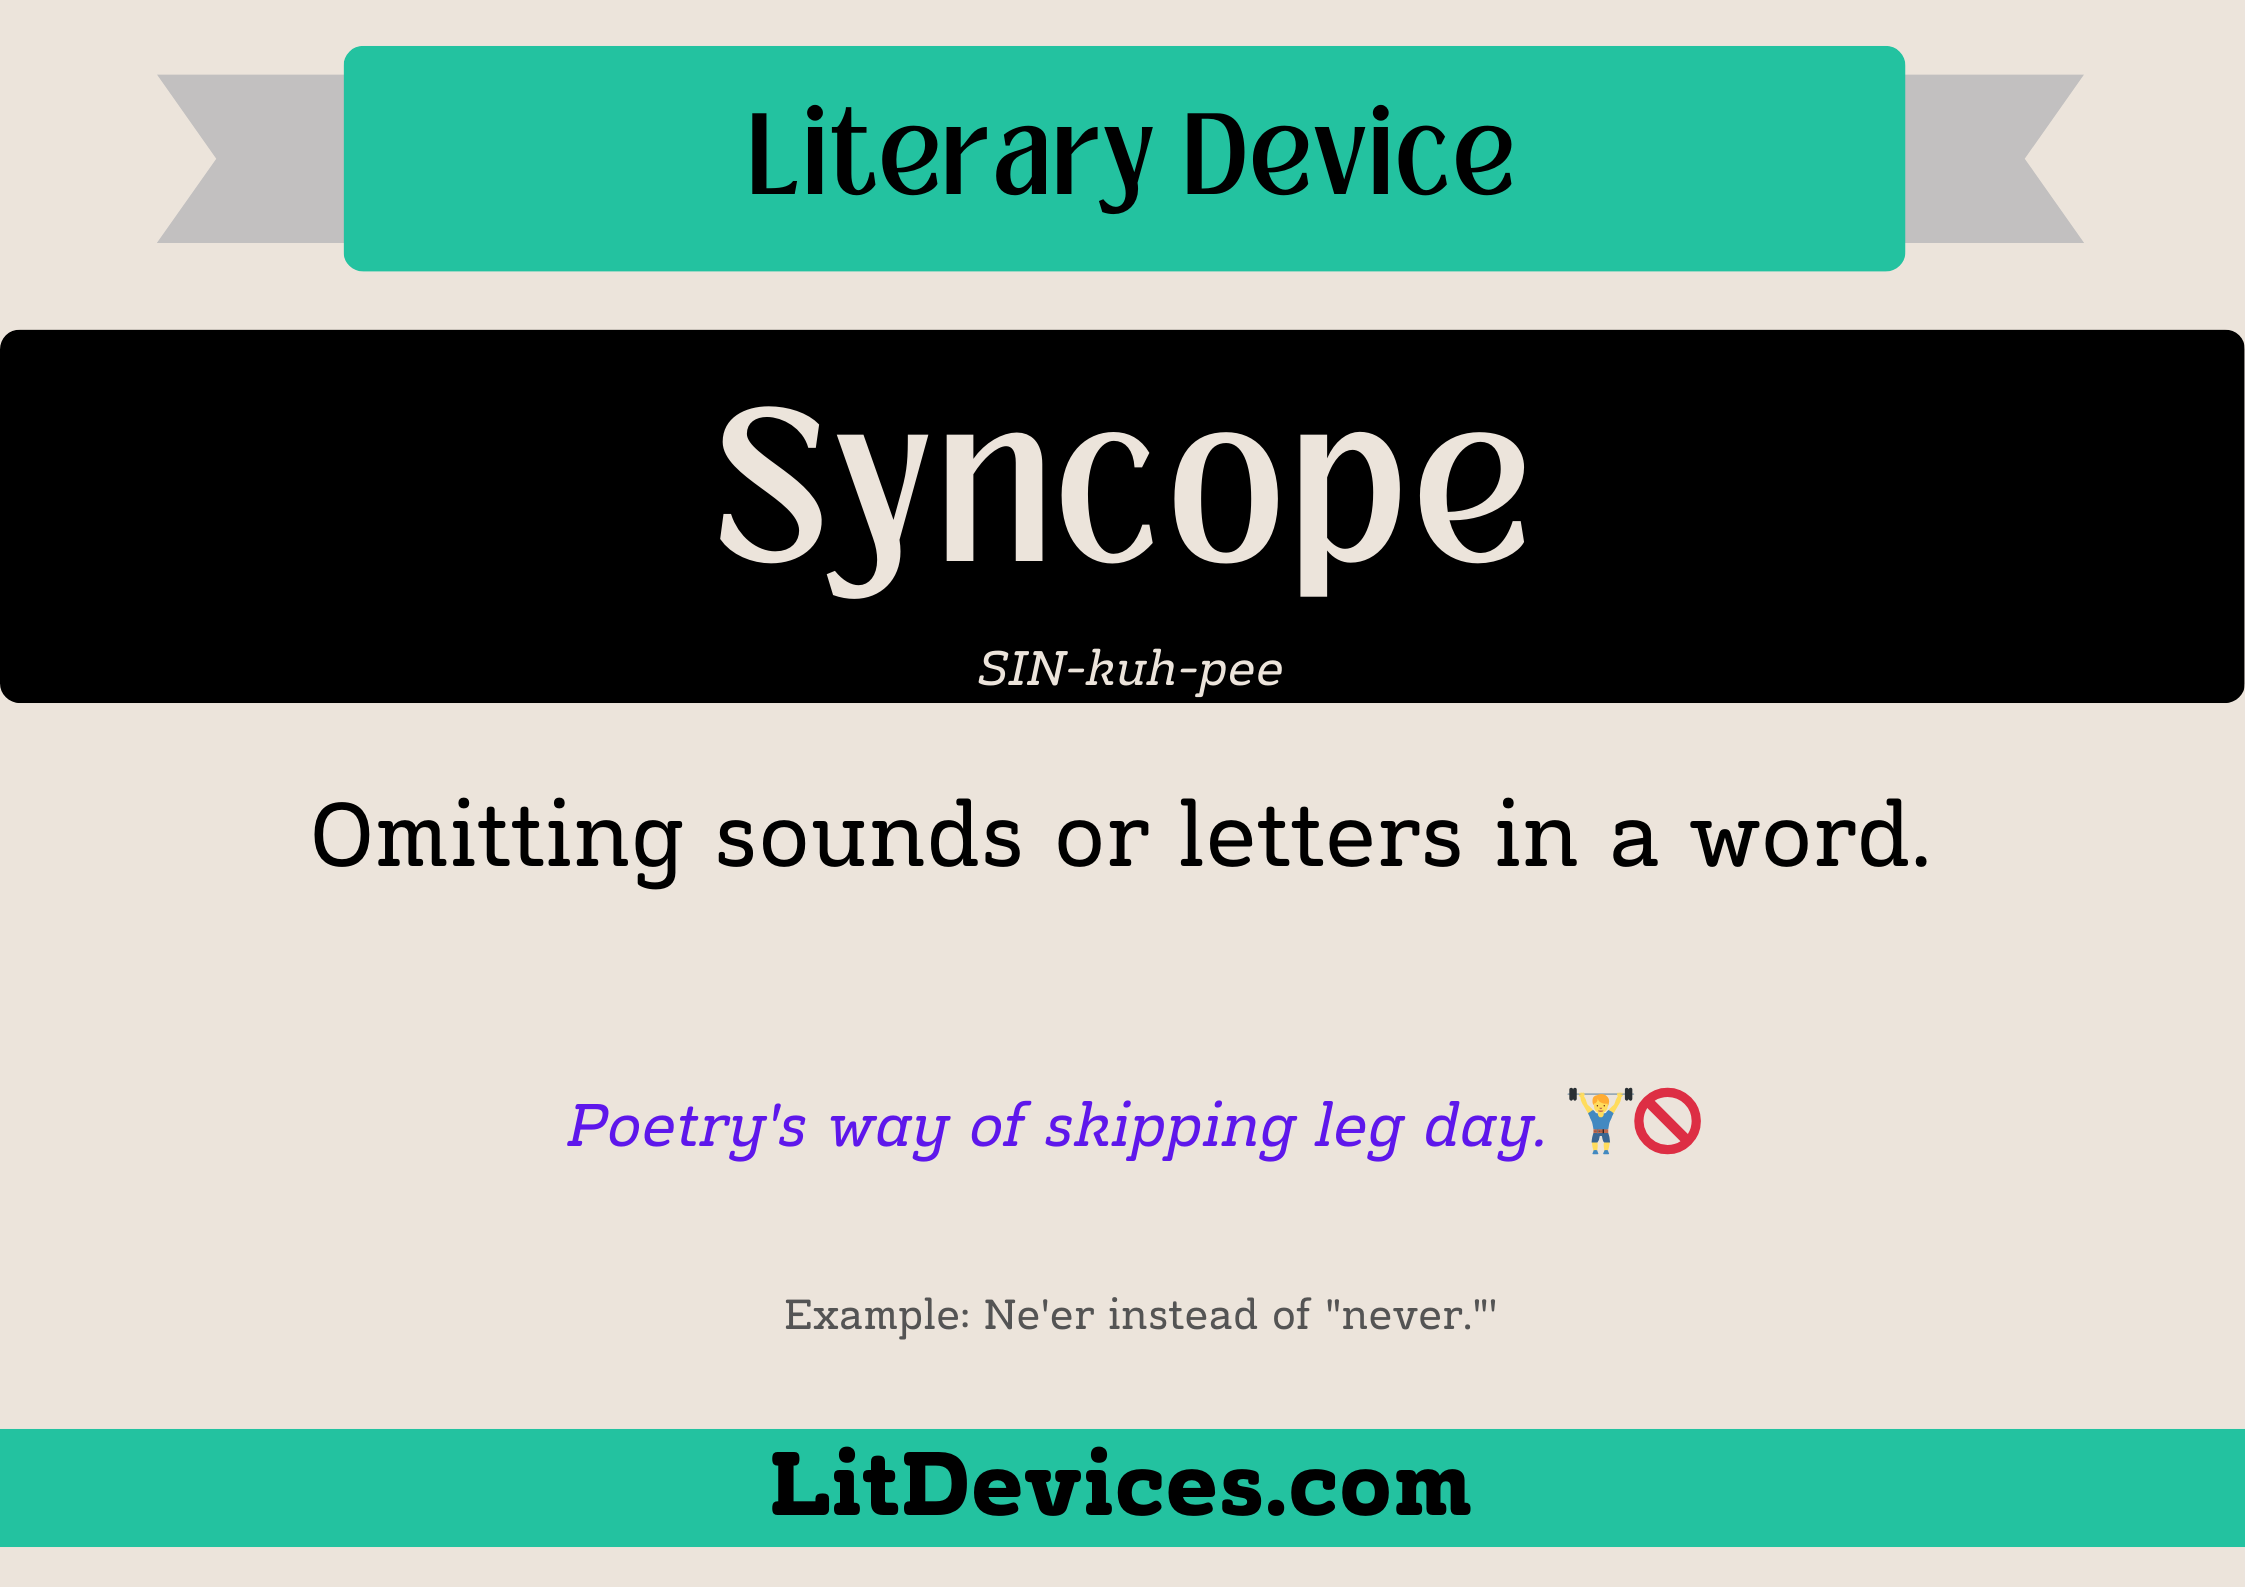 syncope literary device